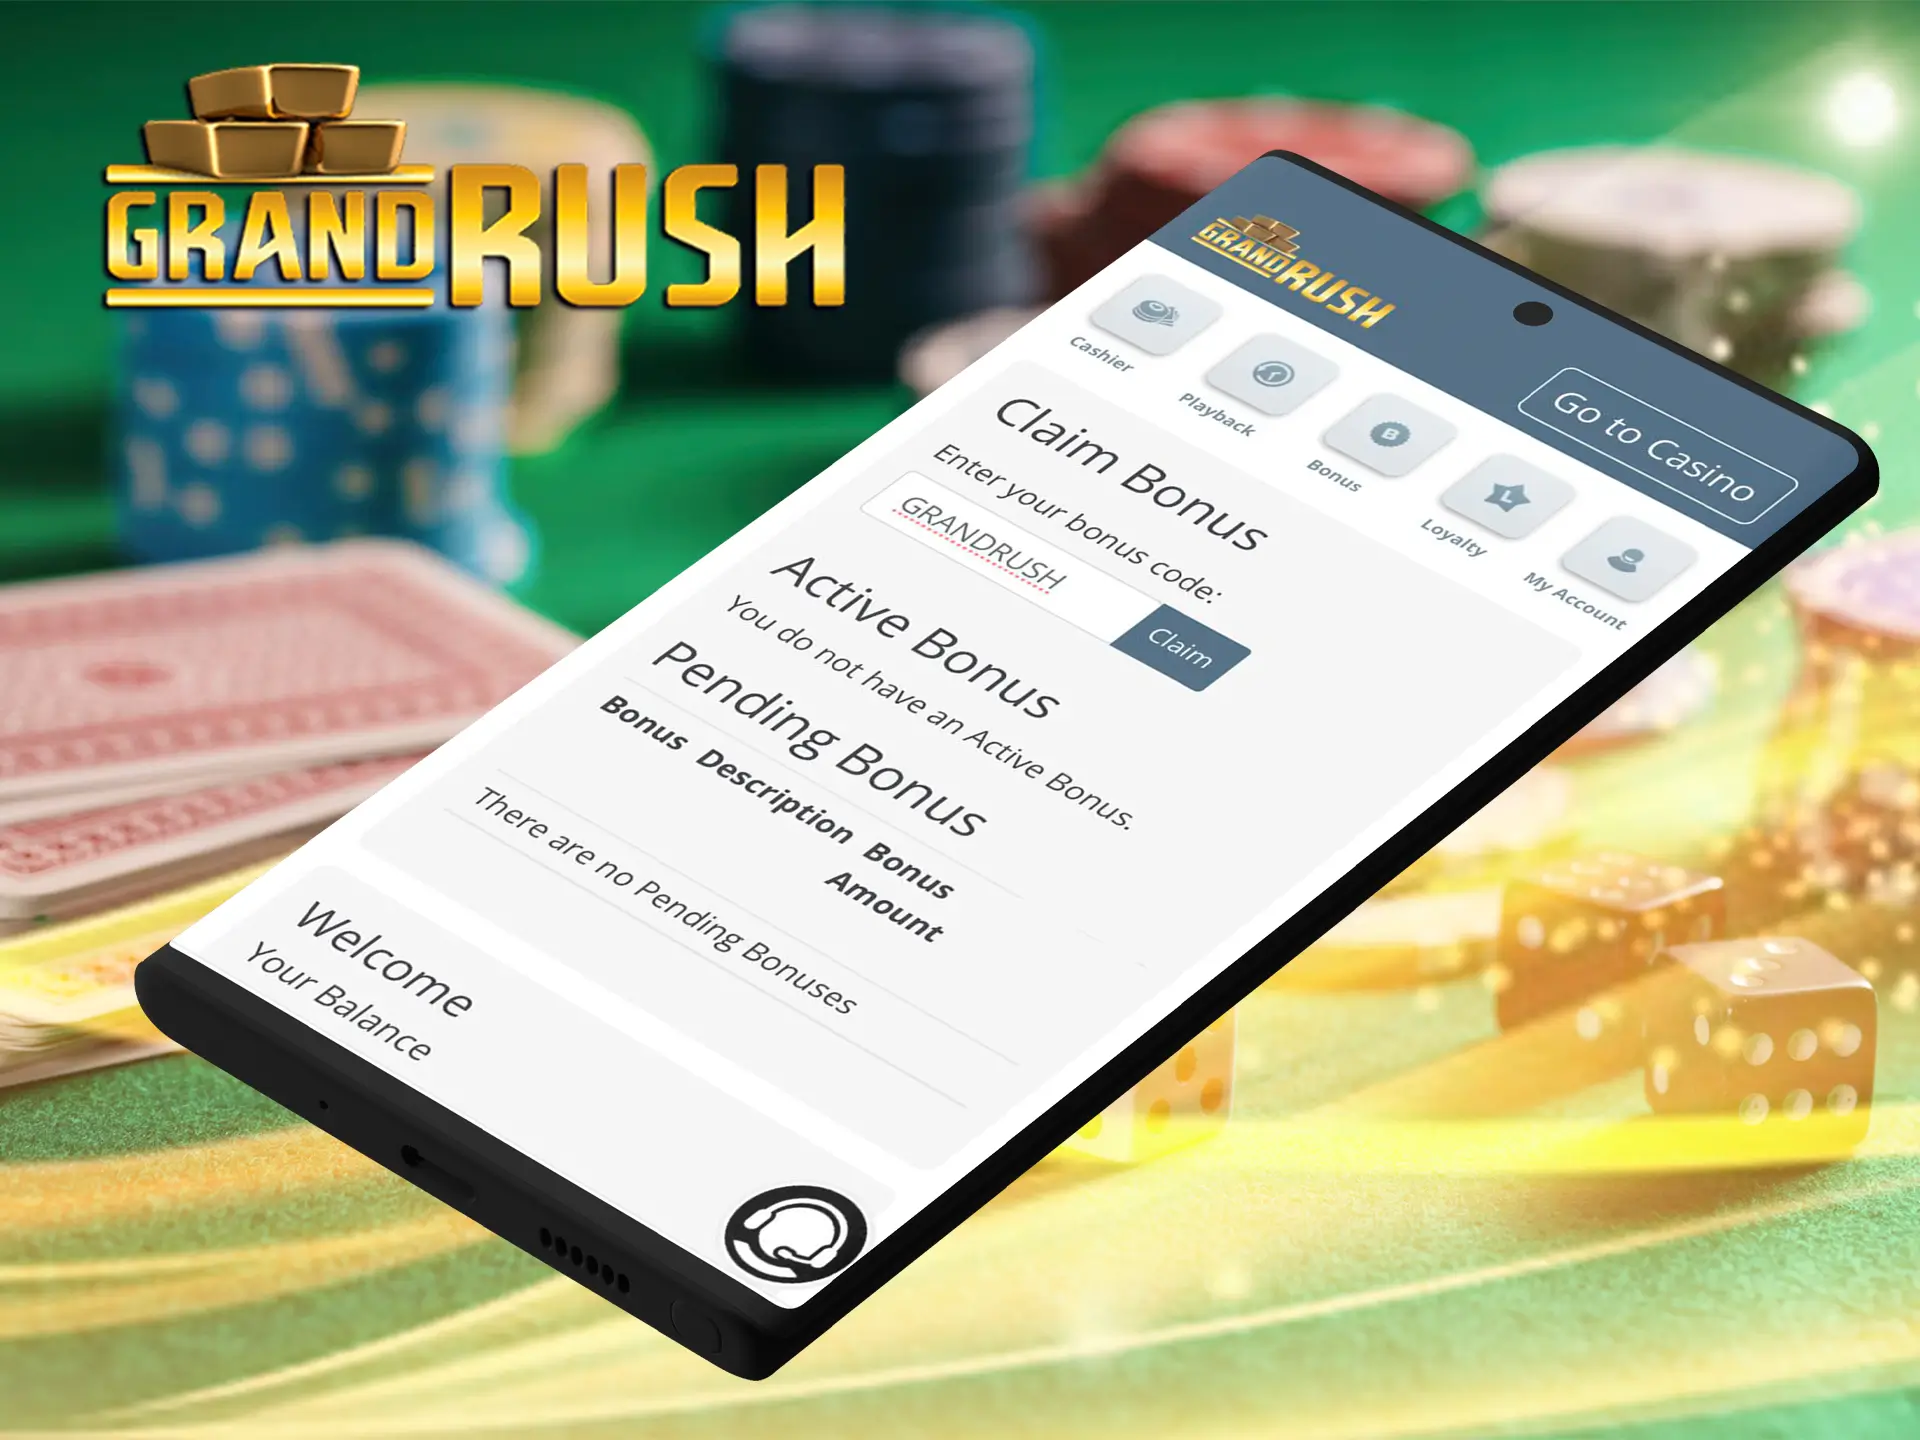 Use the promo code in the Grand Rush app during registration.